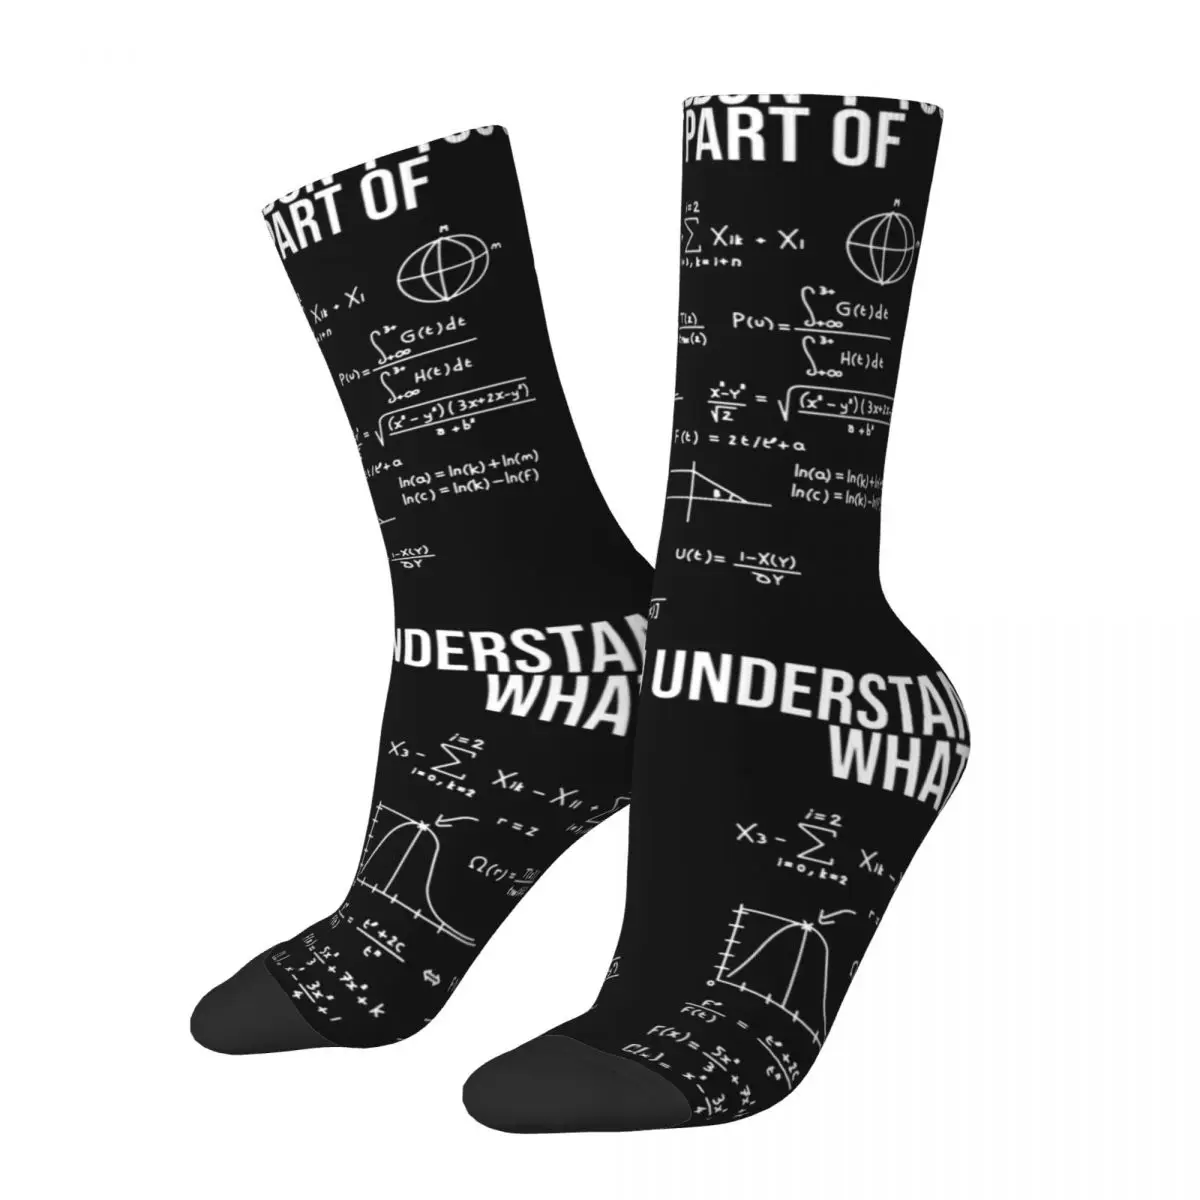 

What Part Of Funny Mechanical Engineer Math Accessories Crew Socks Sweat Absorbing Mathematician Sock Cute for Men's Best Gift